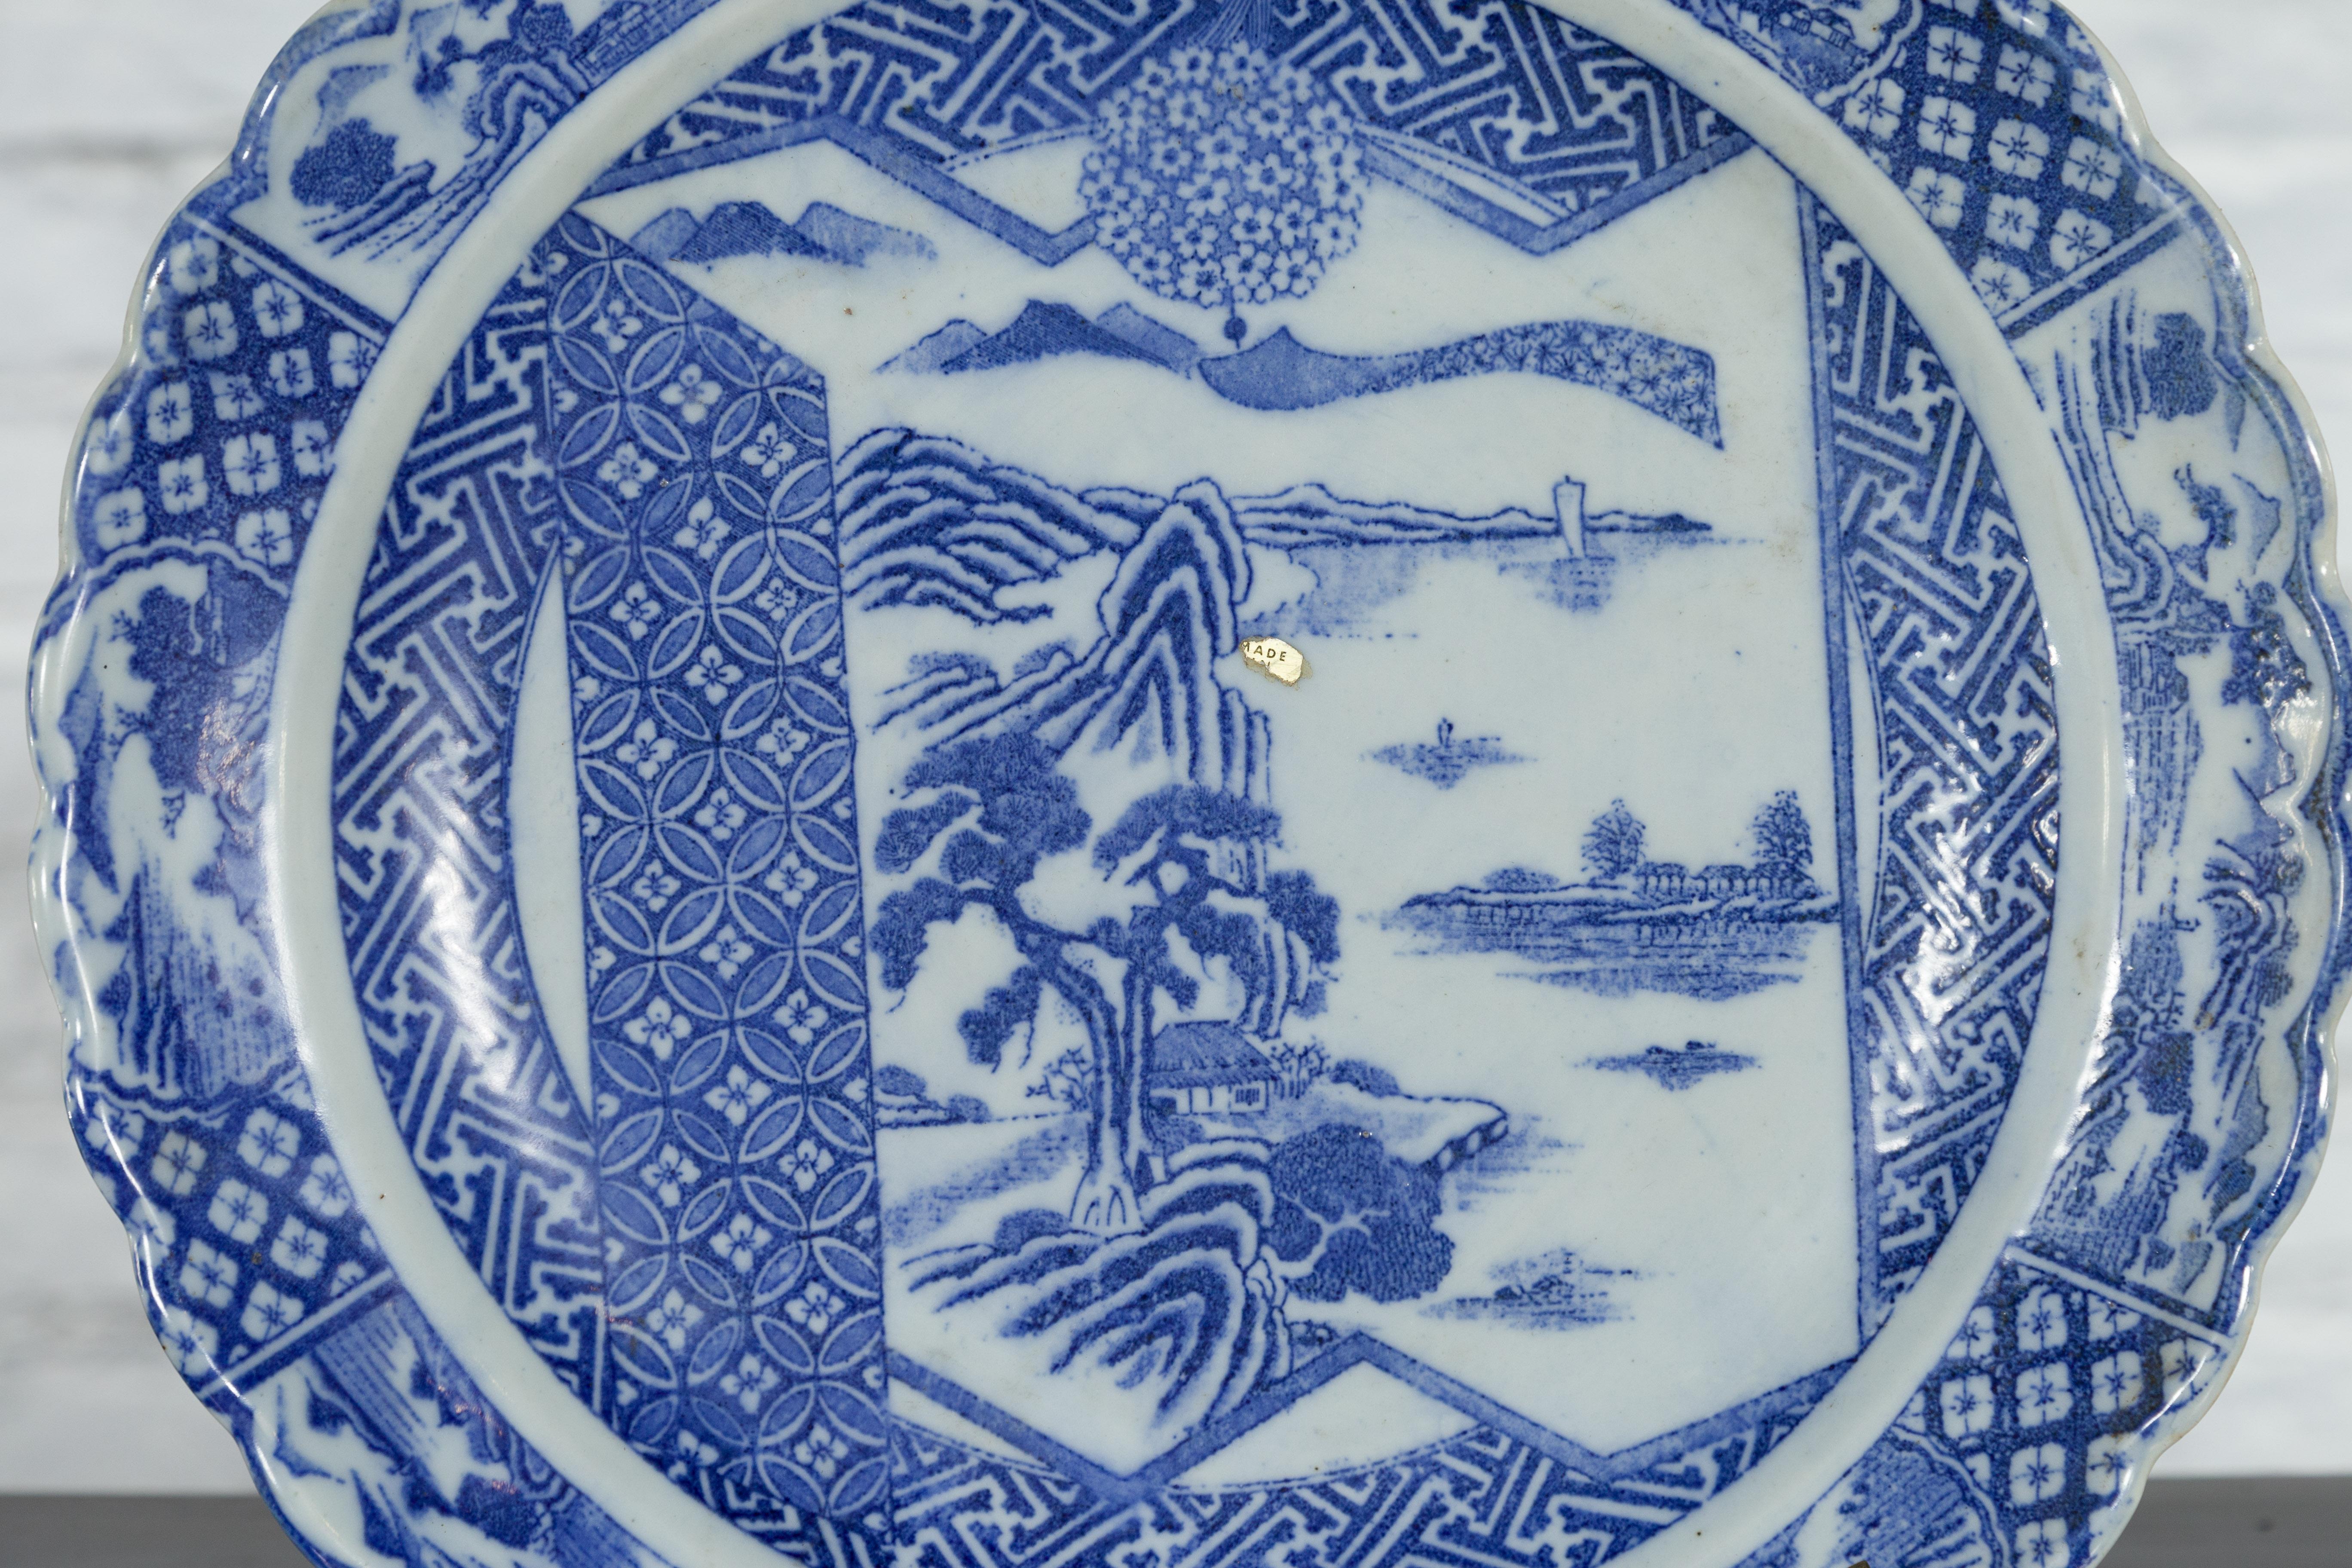 Japanese 19th Century Blue and White Porcelain Plate with Landscapes and Flowers For Sale 1